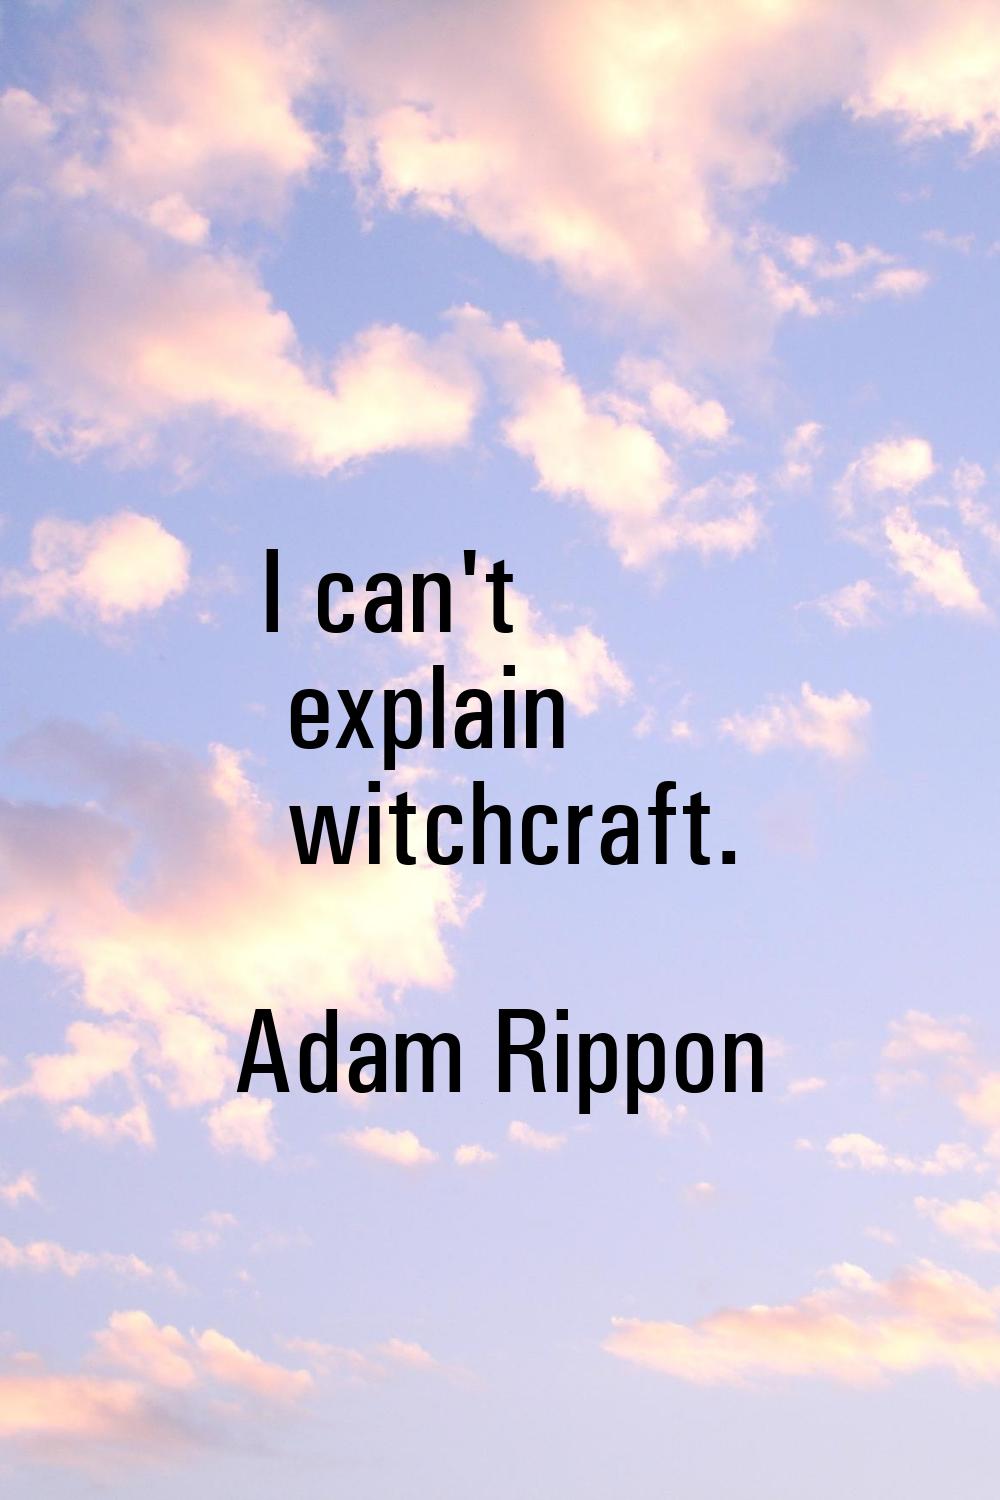 I can't explain witchcraft.